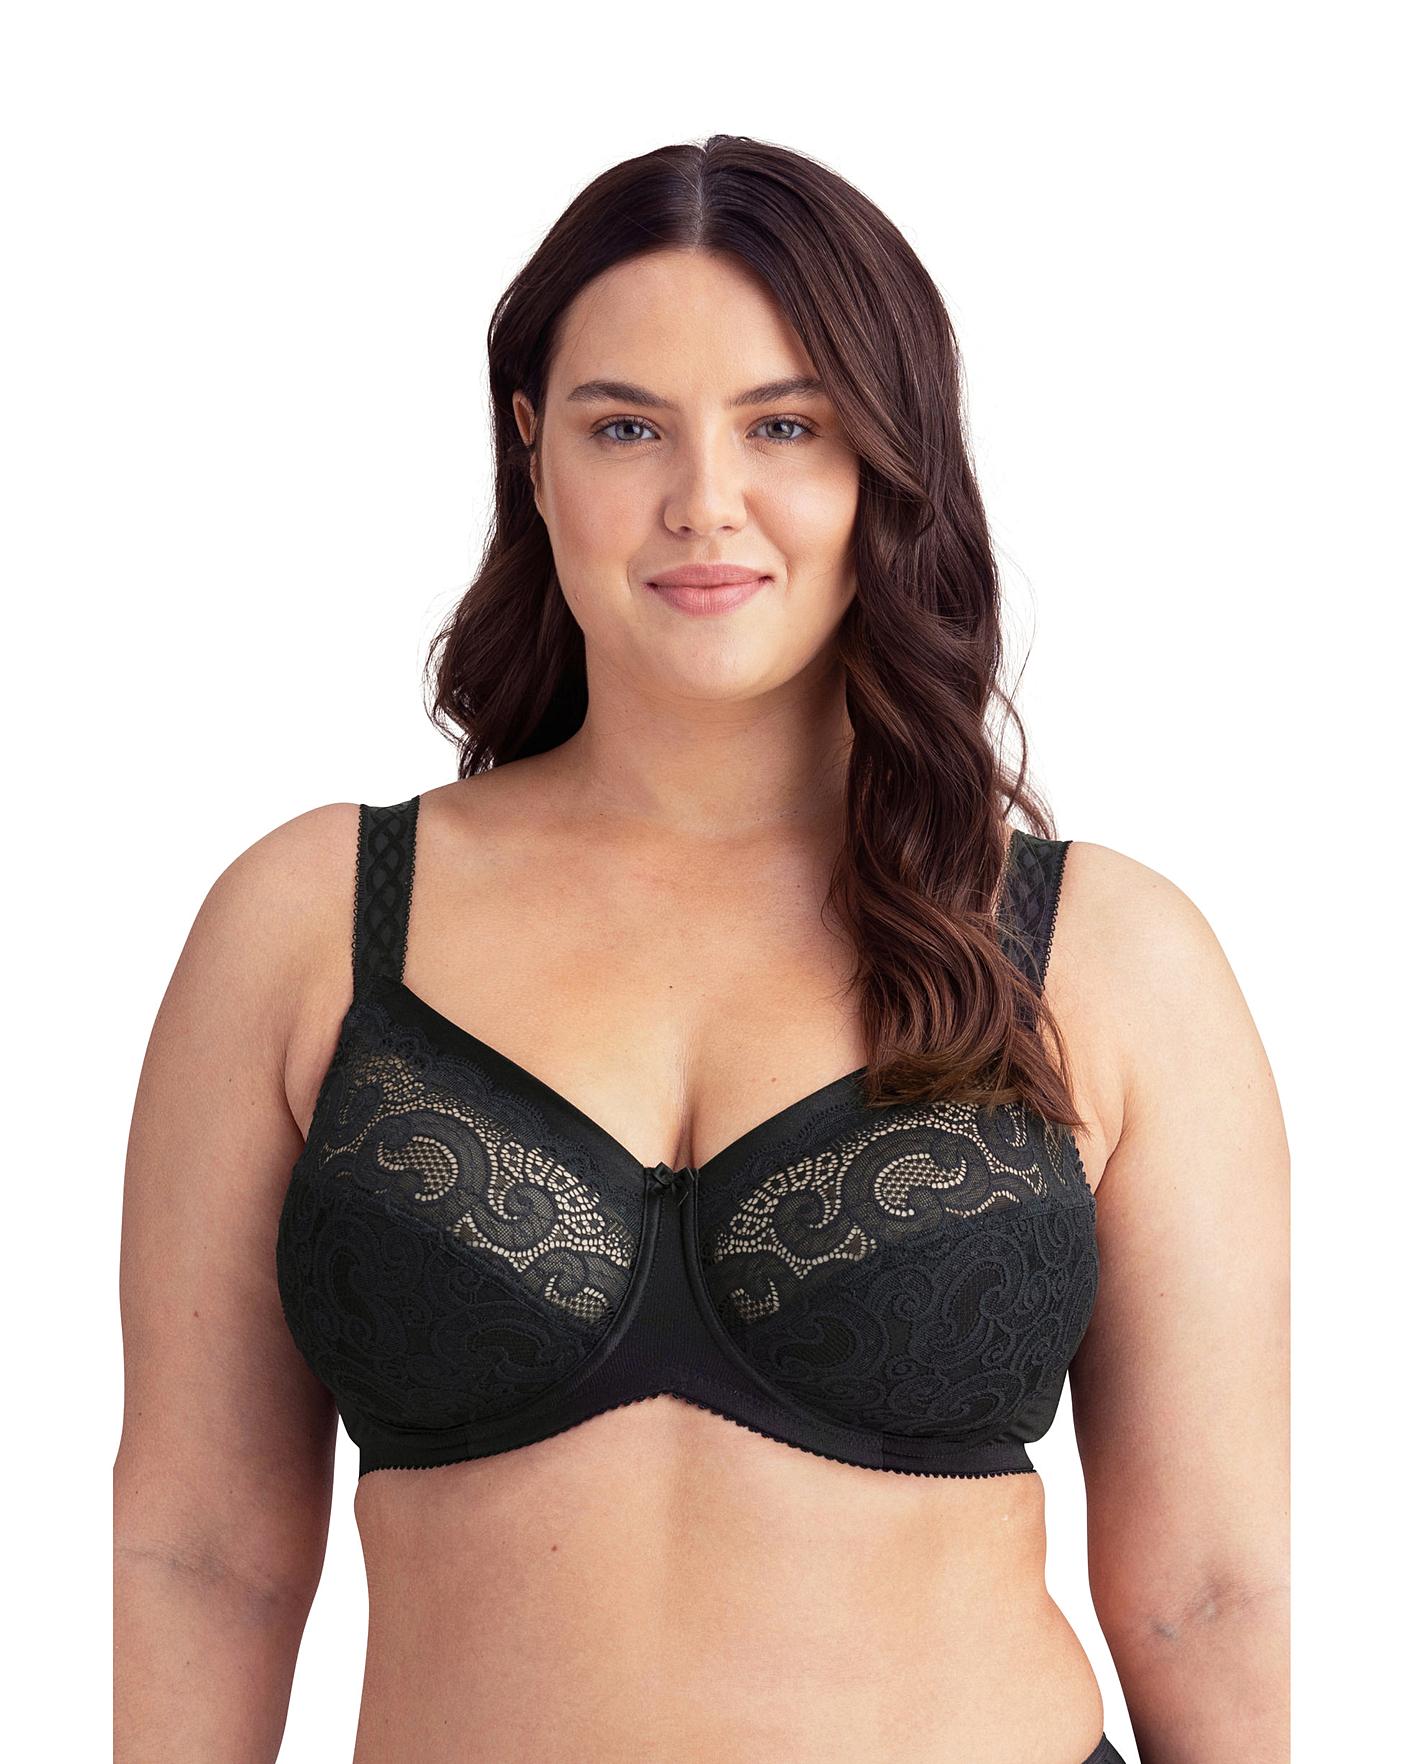 42D, Plus Size, Underwired, Miss mary of sweden, Bras, Lingerie, Women